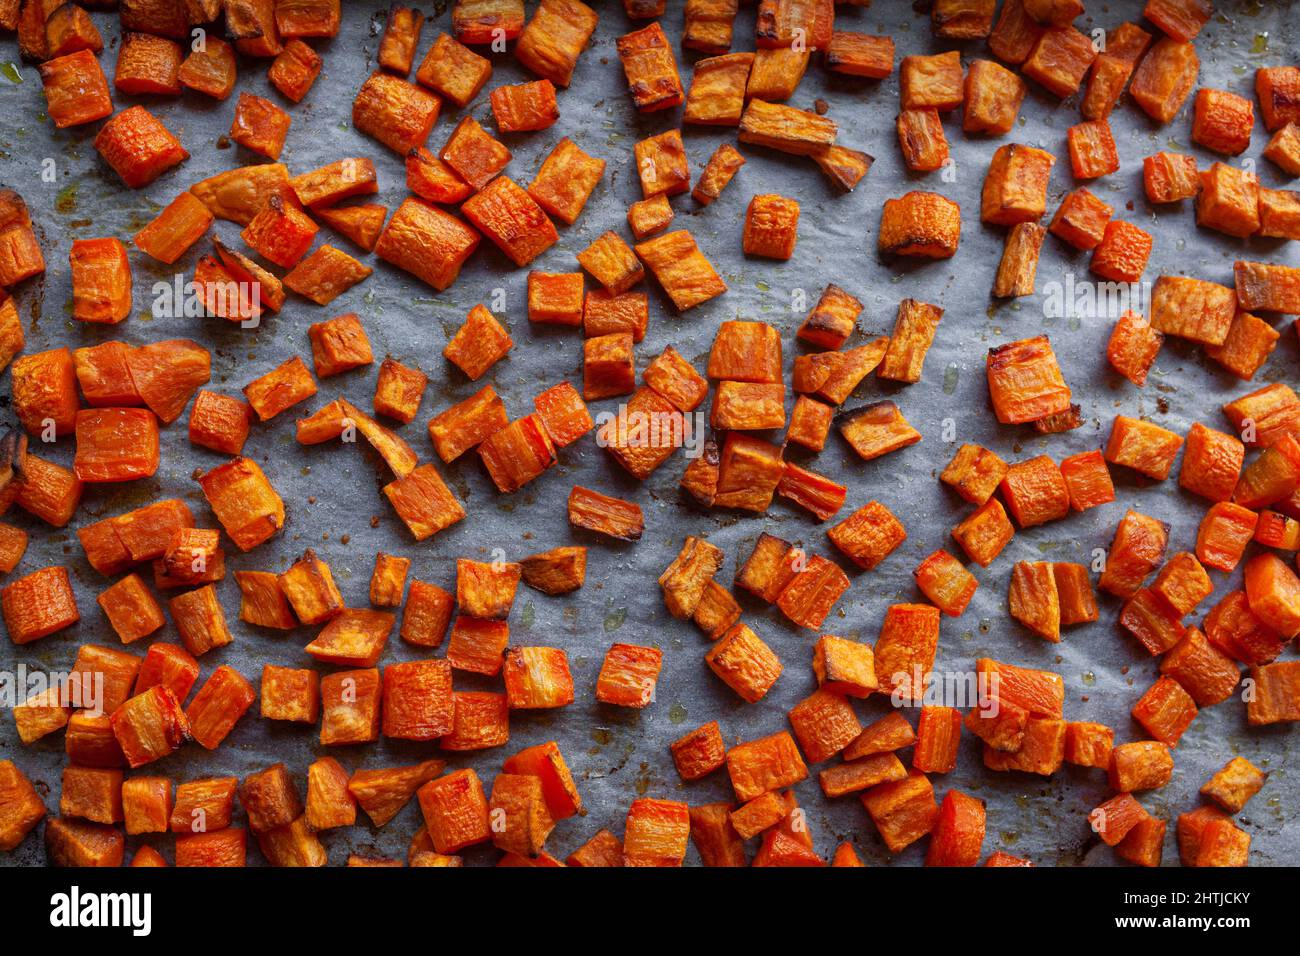 Oven roasted carrots and sweet potatoes on a parchment paper, cut into cubes Stock Photo